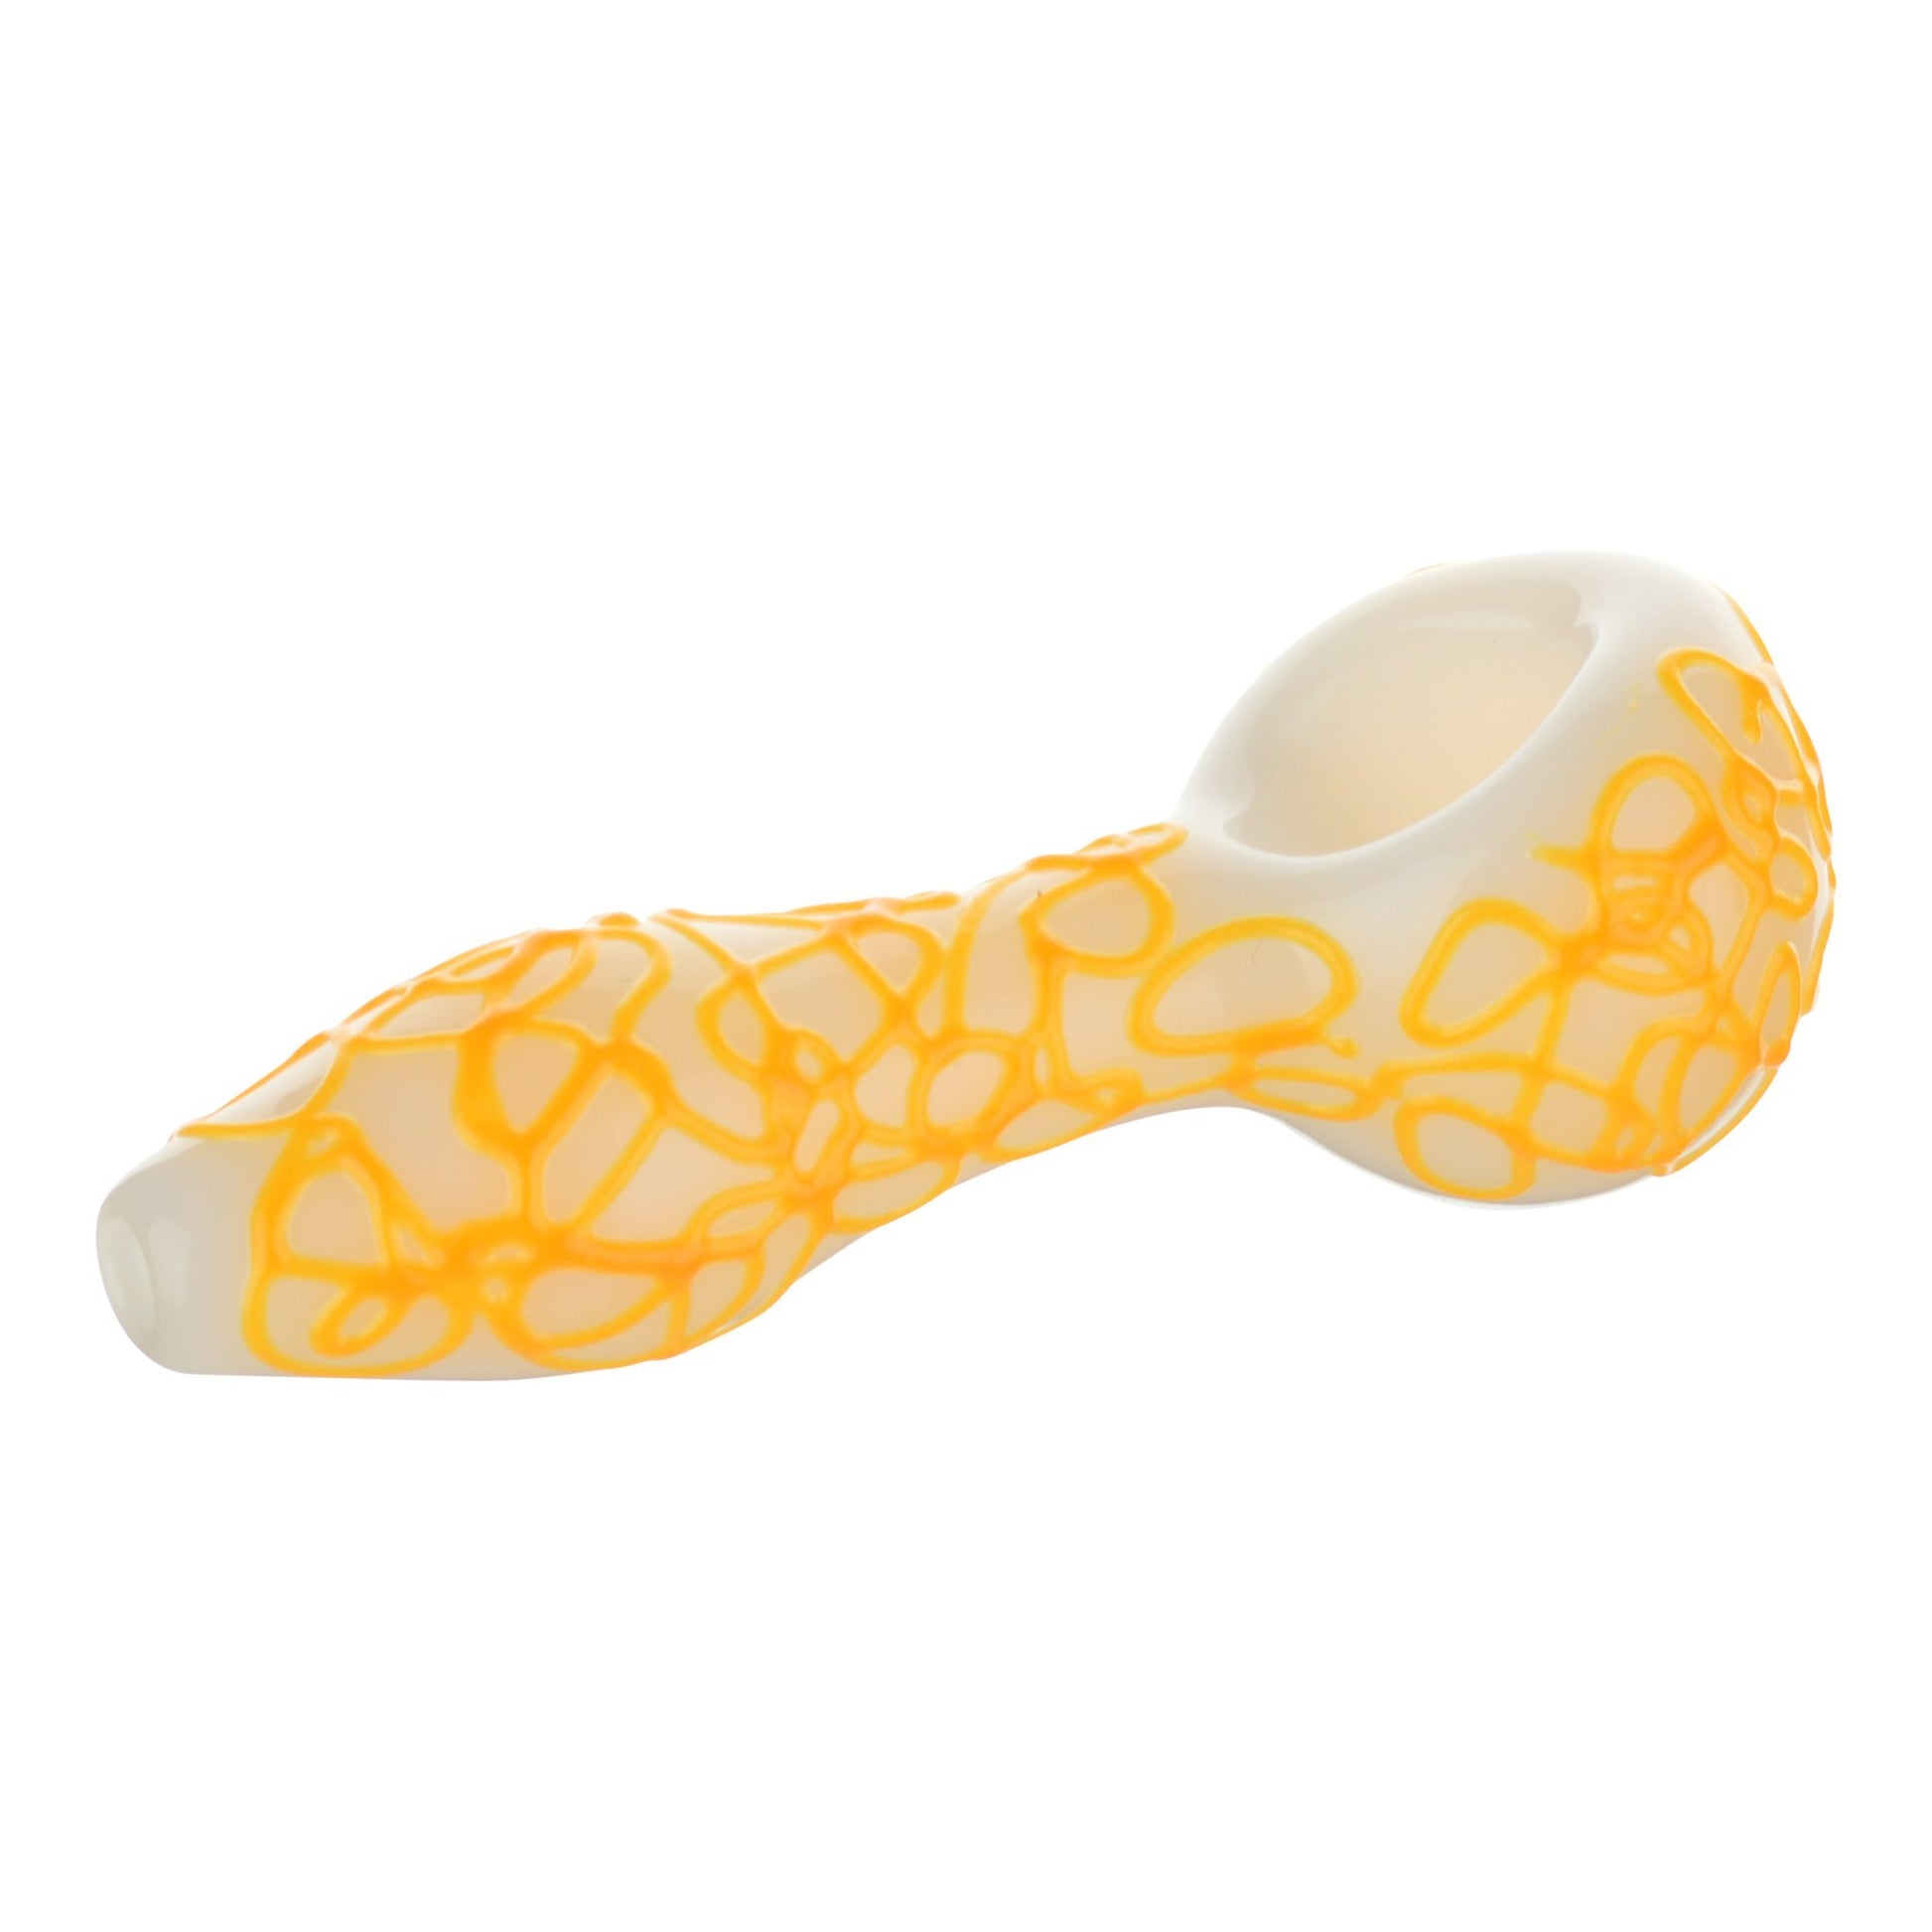 Full shot of 4-inch glass white pipe with yellow swirls white background bowl on right